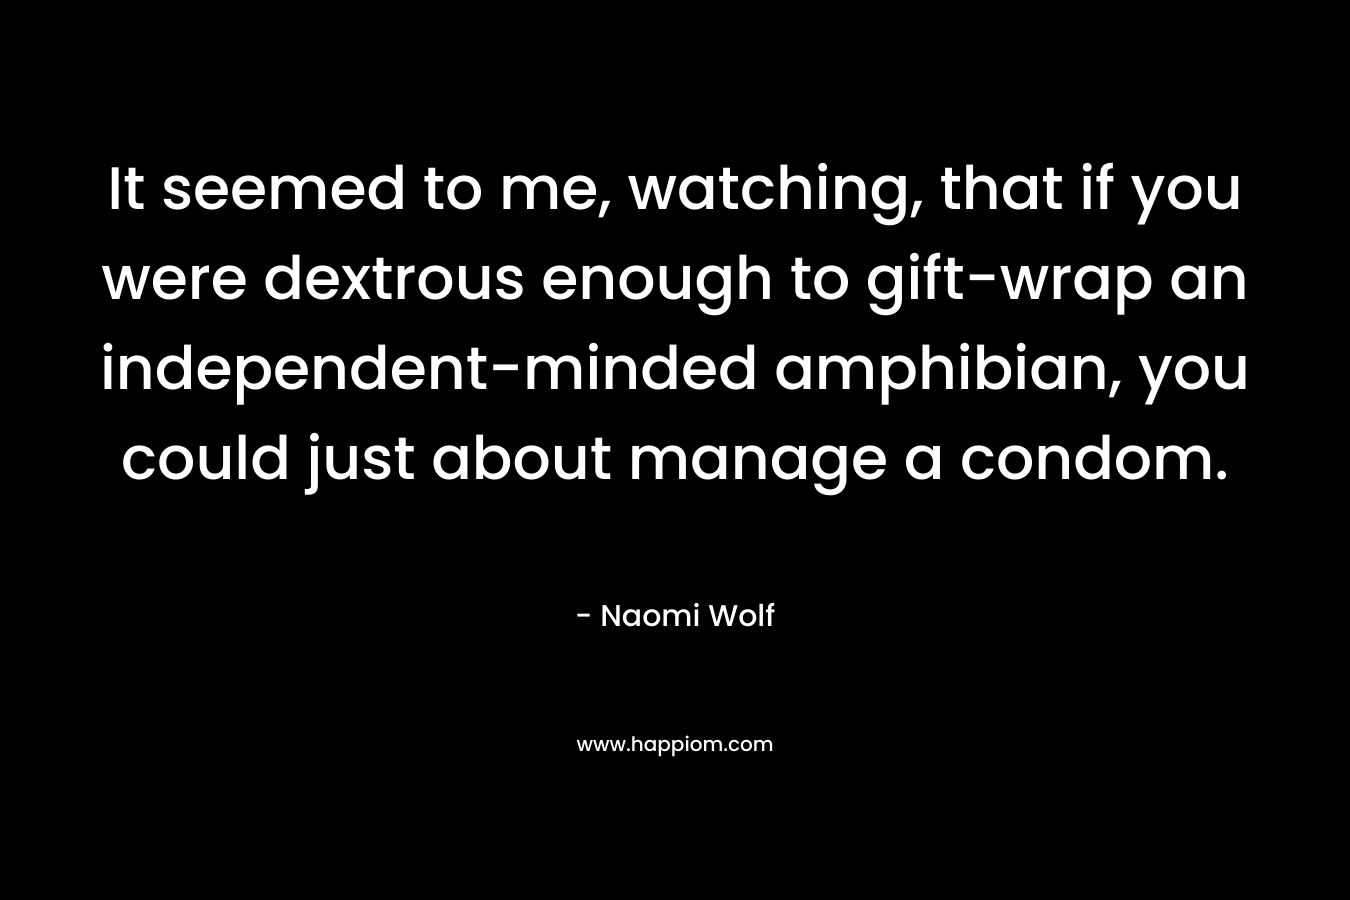 It seemed to me, watching, that if you were dextrous enough to gift-wrap an independent-minded amphibian, you could just about manage a condom. – Naomi Wolf